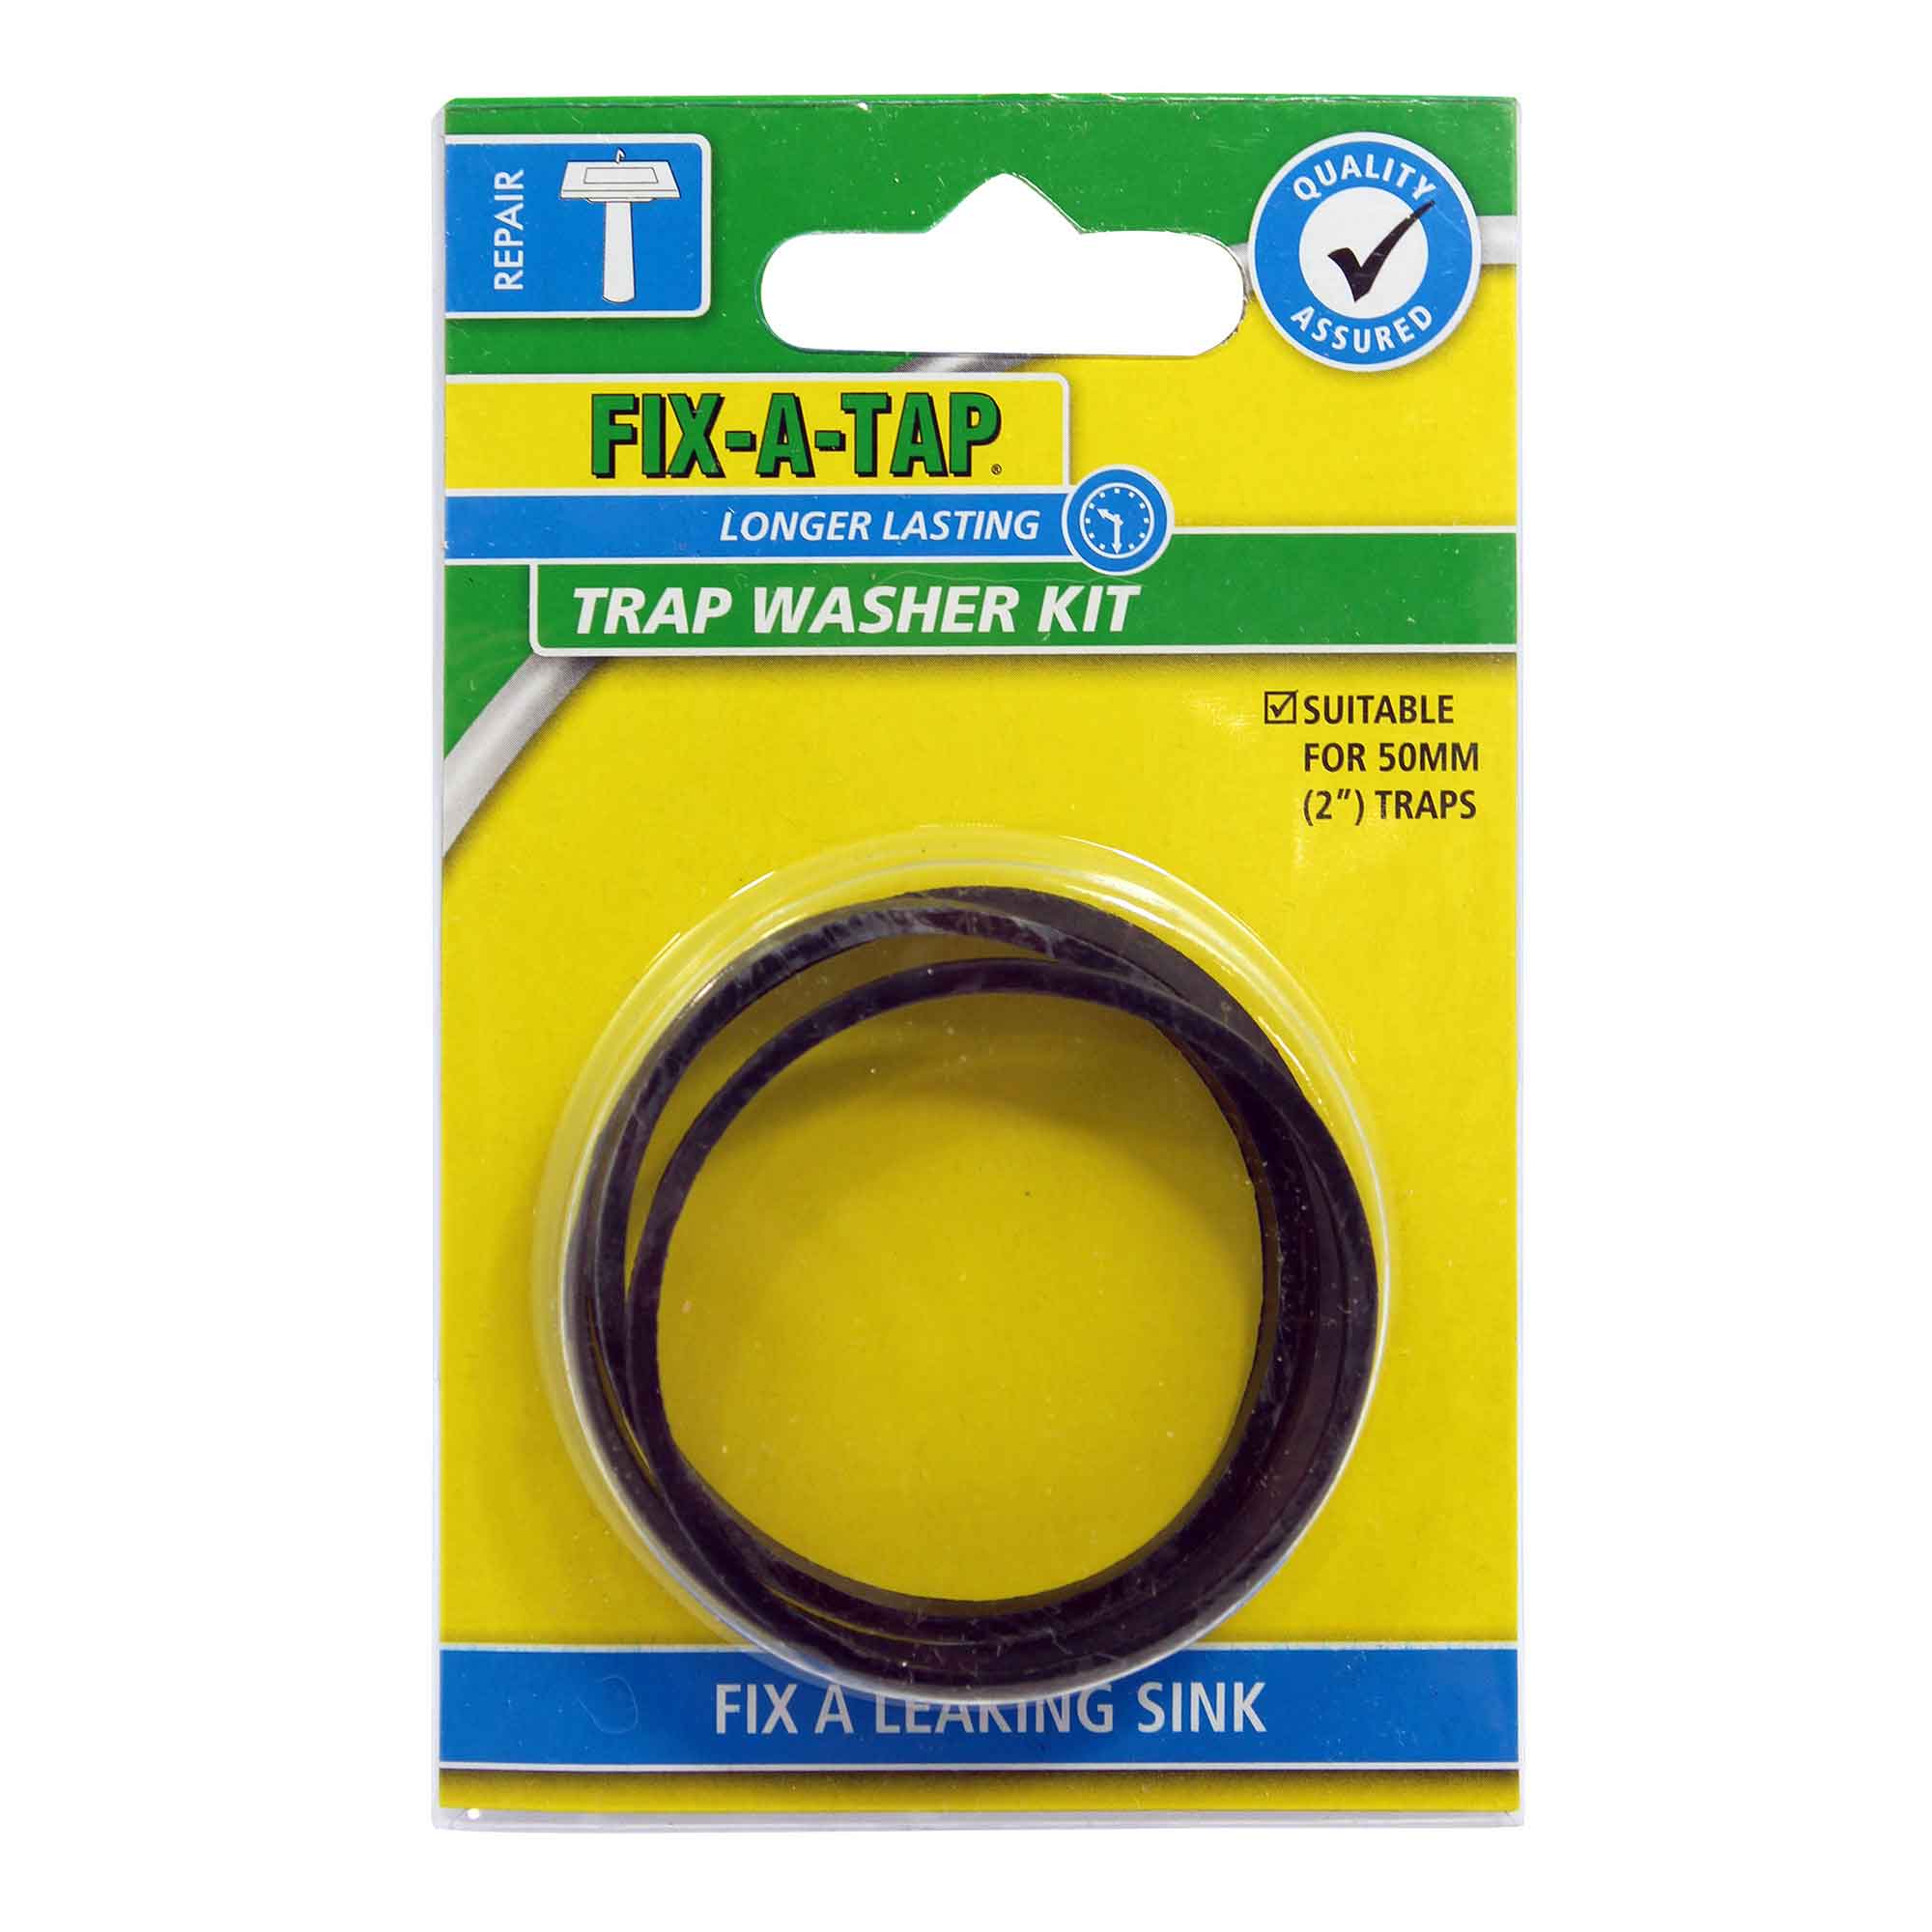 FIX-A-TAP Trap Washer Kit Suitable For 2"/50mm Traps Fix A Leaking Sink 205001 - Double Bay Hardware